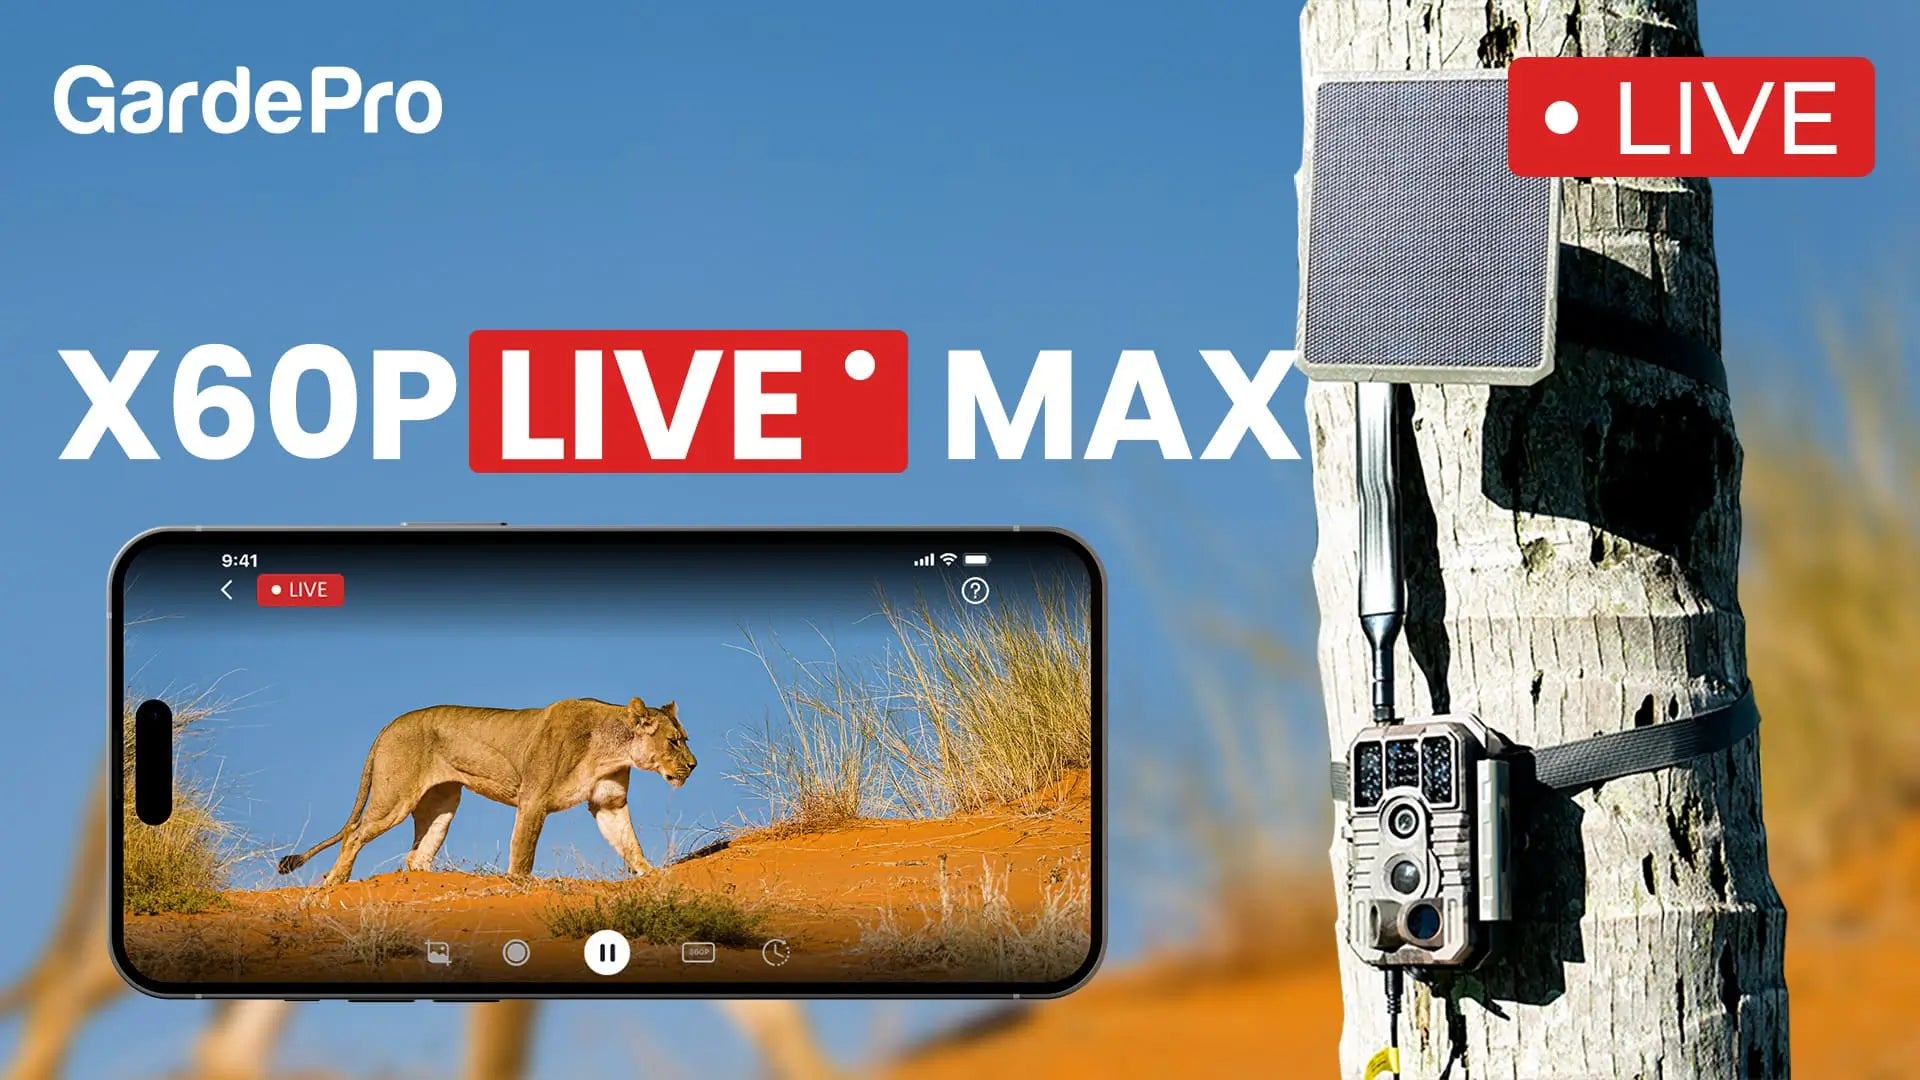 The GardePro X60P Live Max trail camera connects to the strongest LTE network and can send photos to your phone in real-time or at intervals.